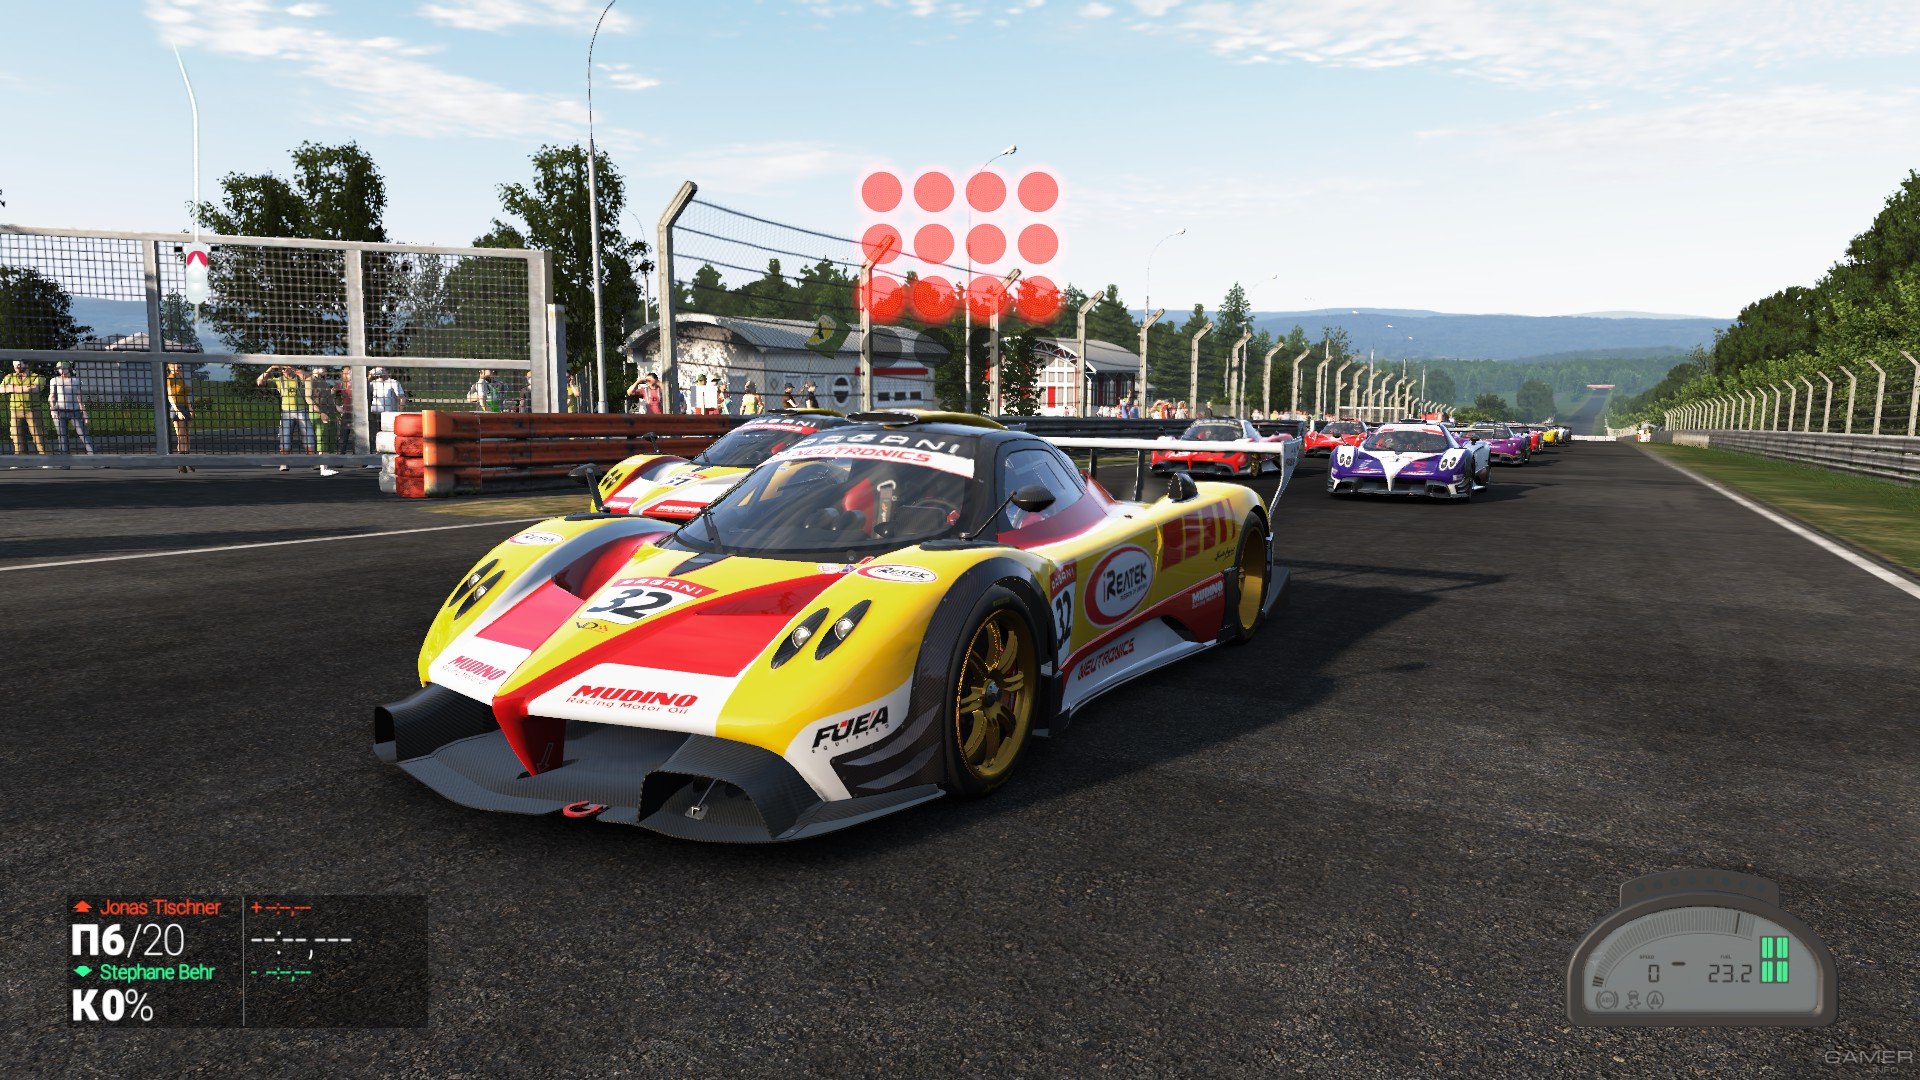 Project cars games 2015  projectcarskeygenerator2015